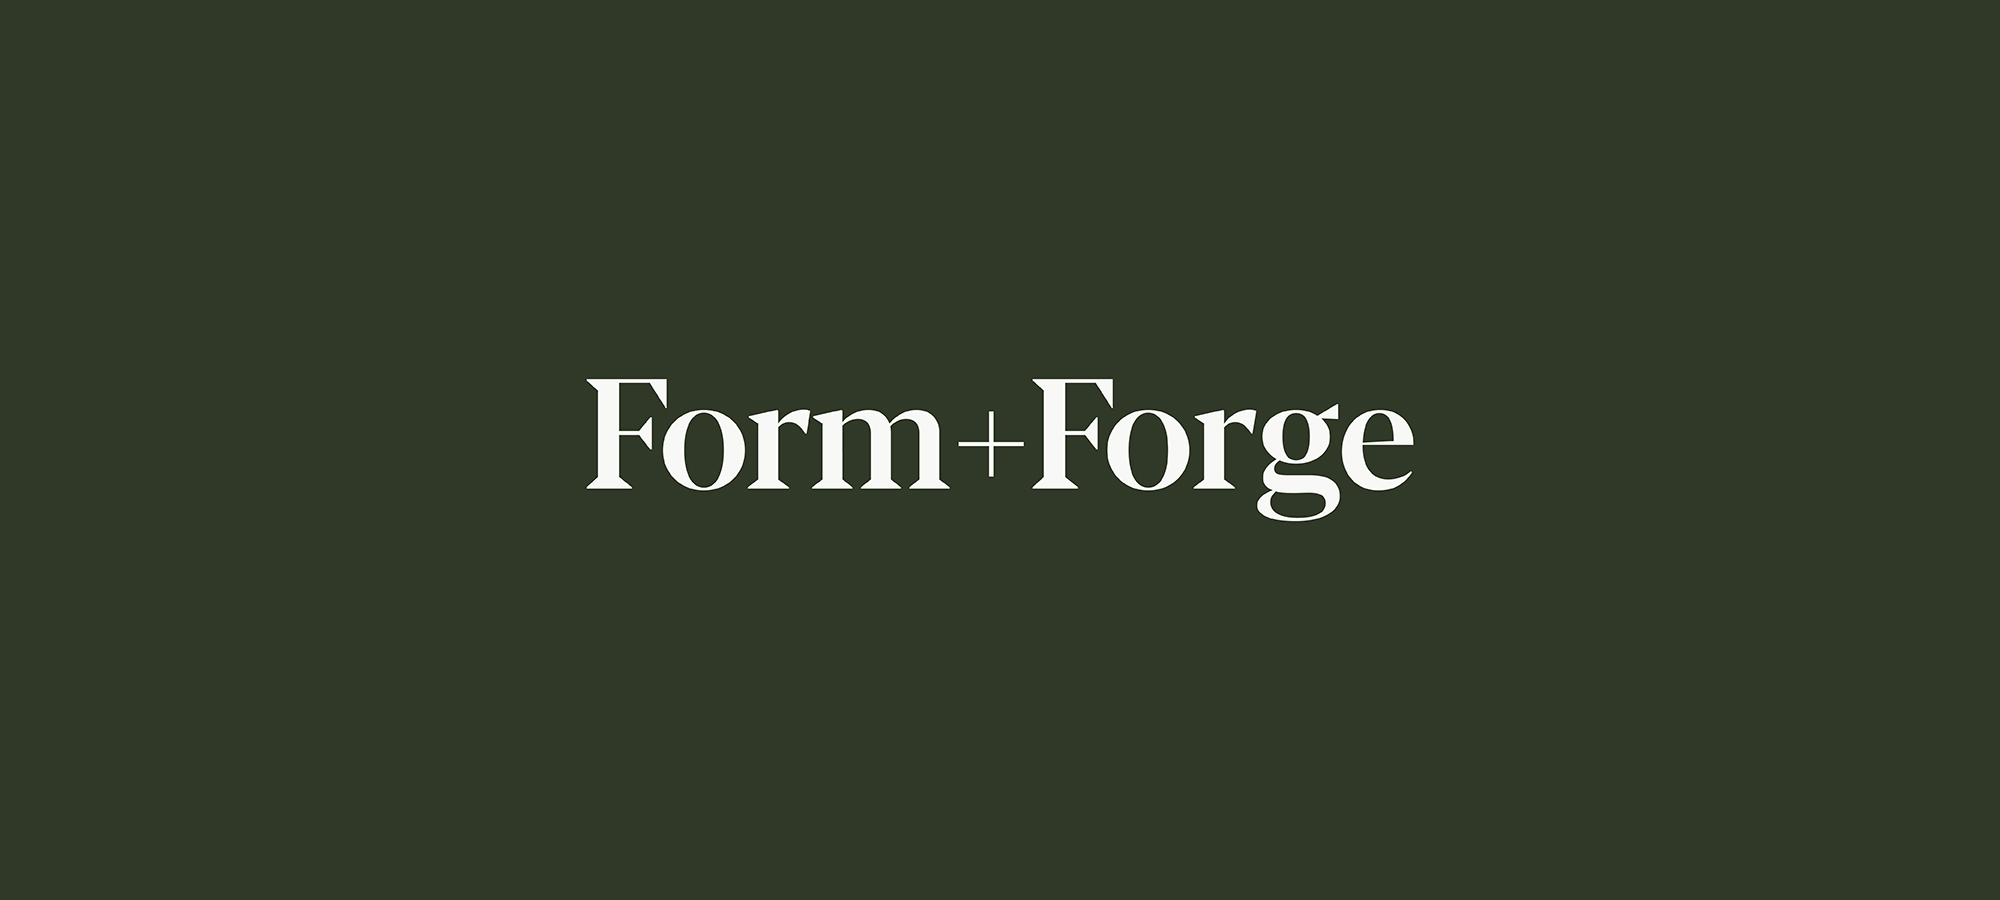 The Form+Forge wordmark in off-white on a seaweed green background. The Form+Forge letterforms are a Modern style with sharp contrast between the thick and thin strokes.